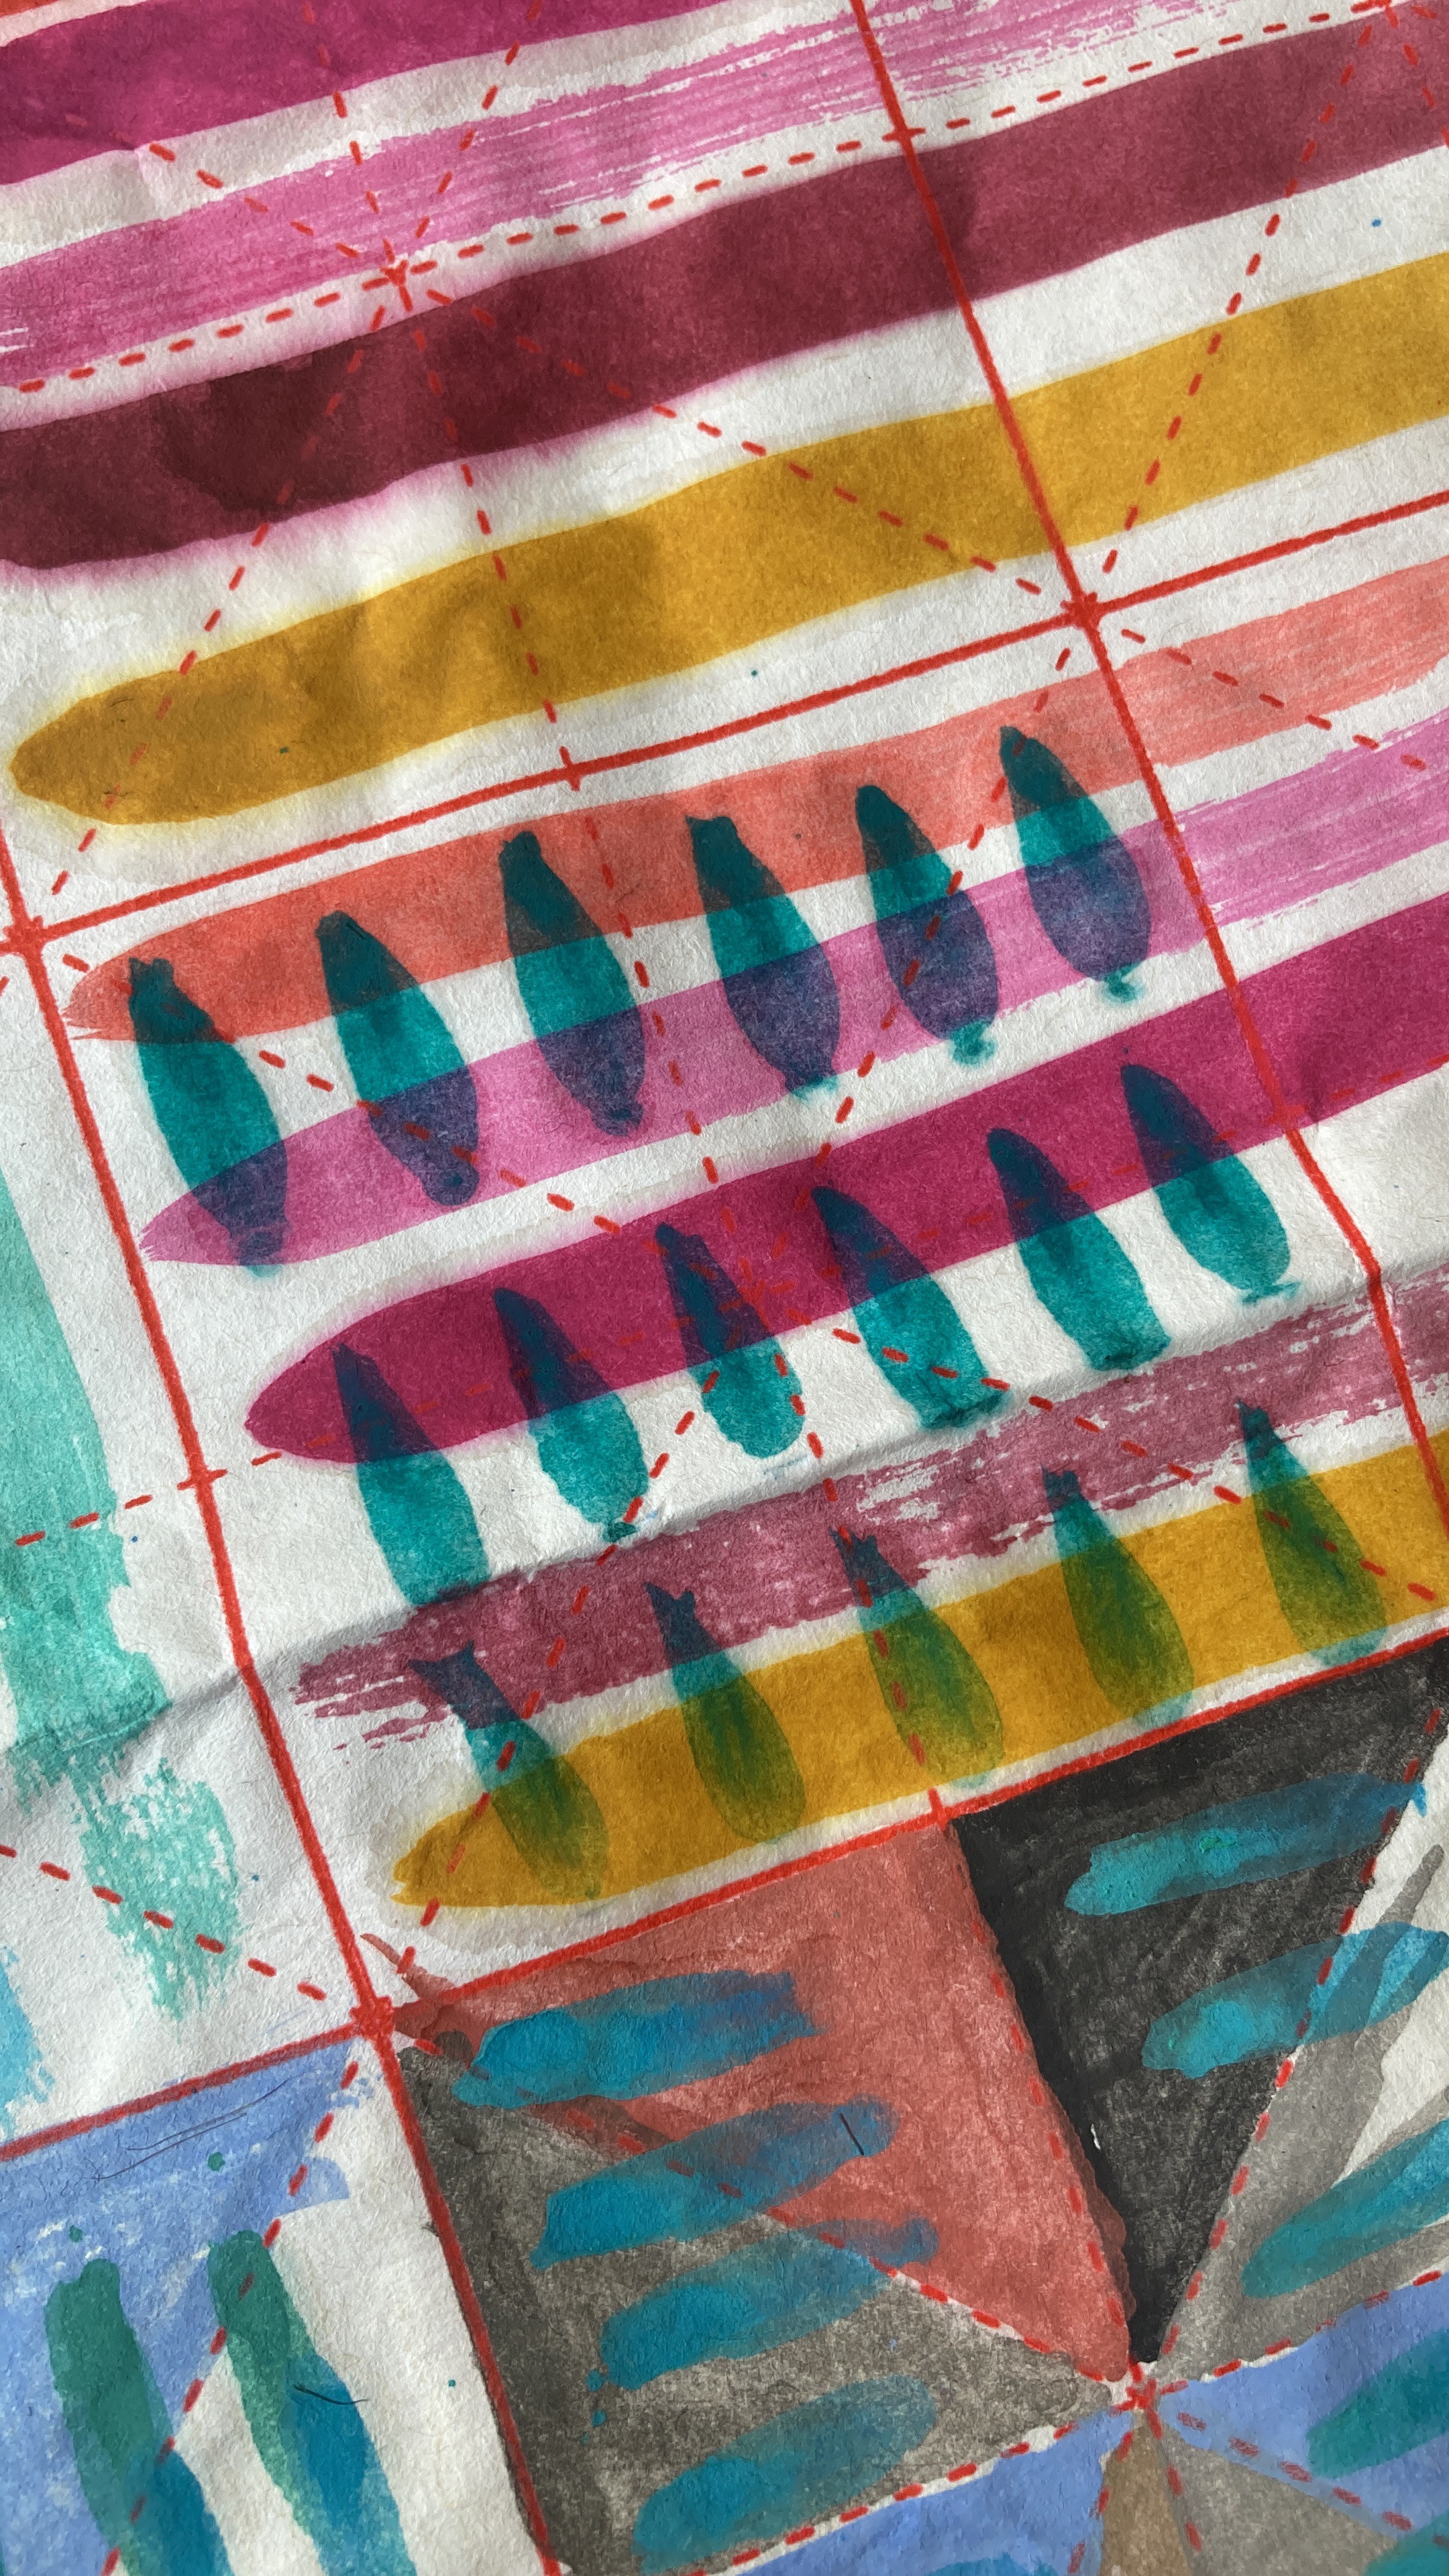 A close up image of a piece of white paper with colourful designs painted in watercolour